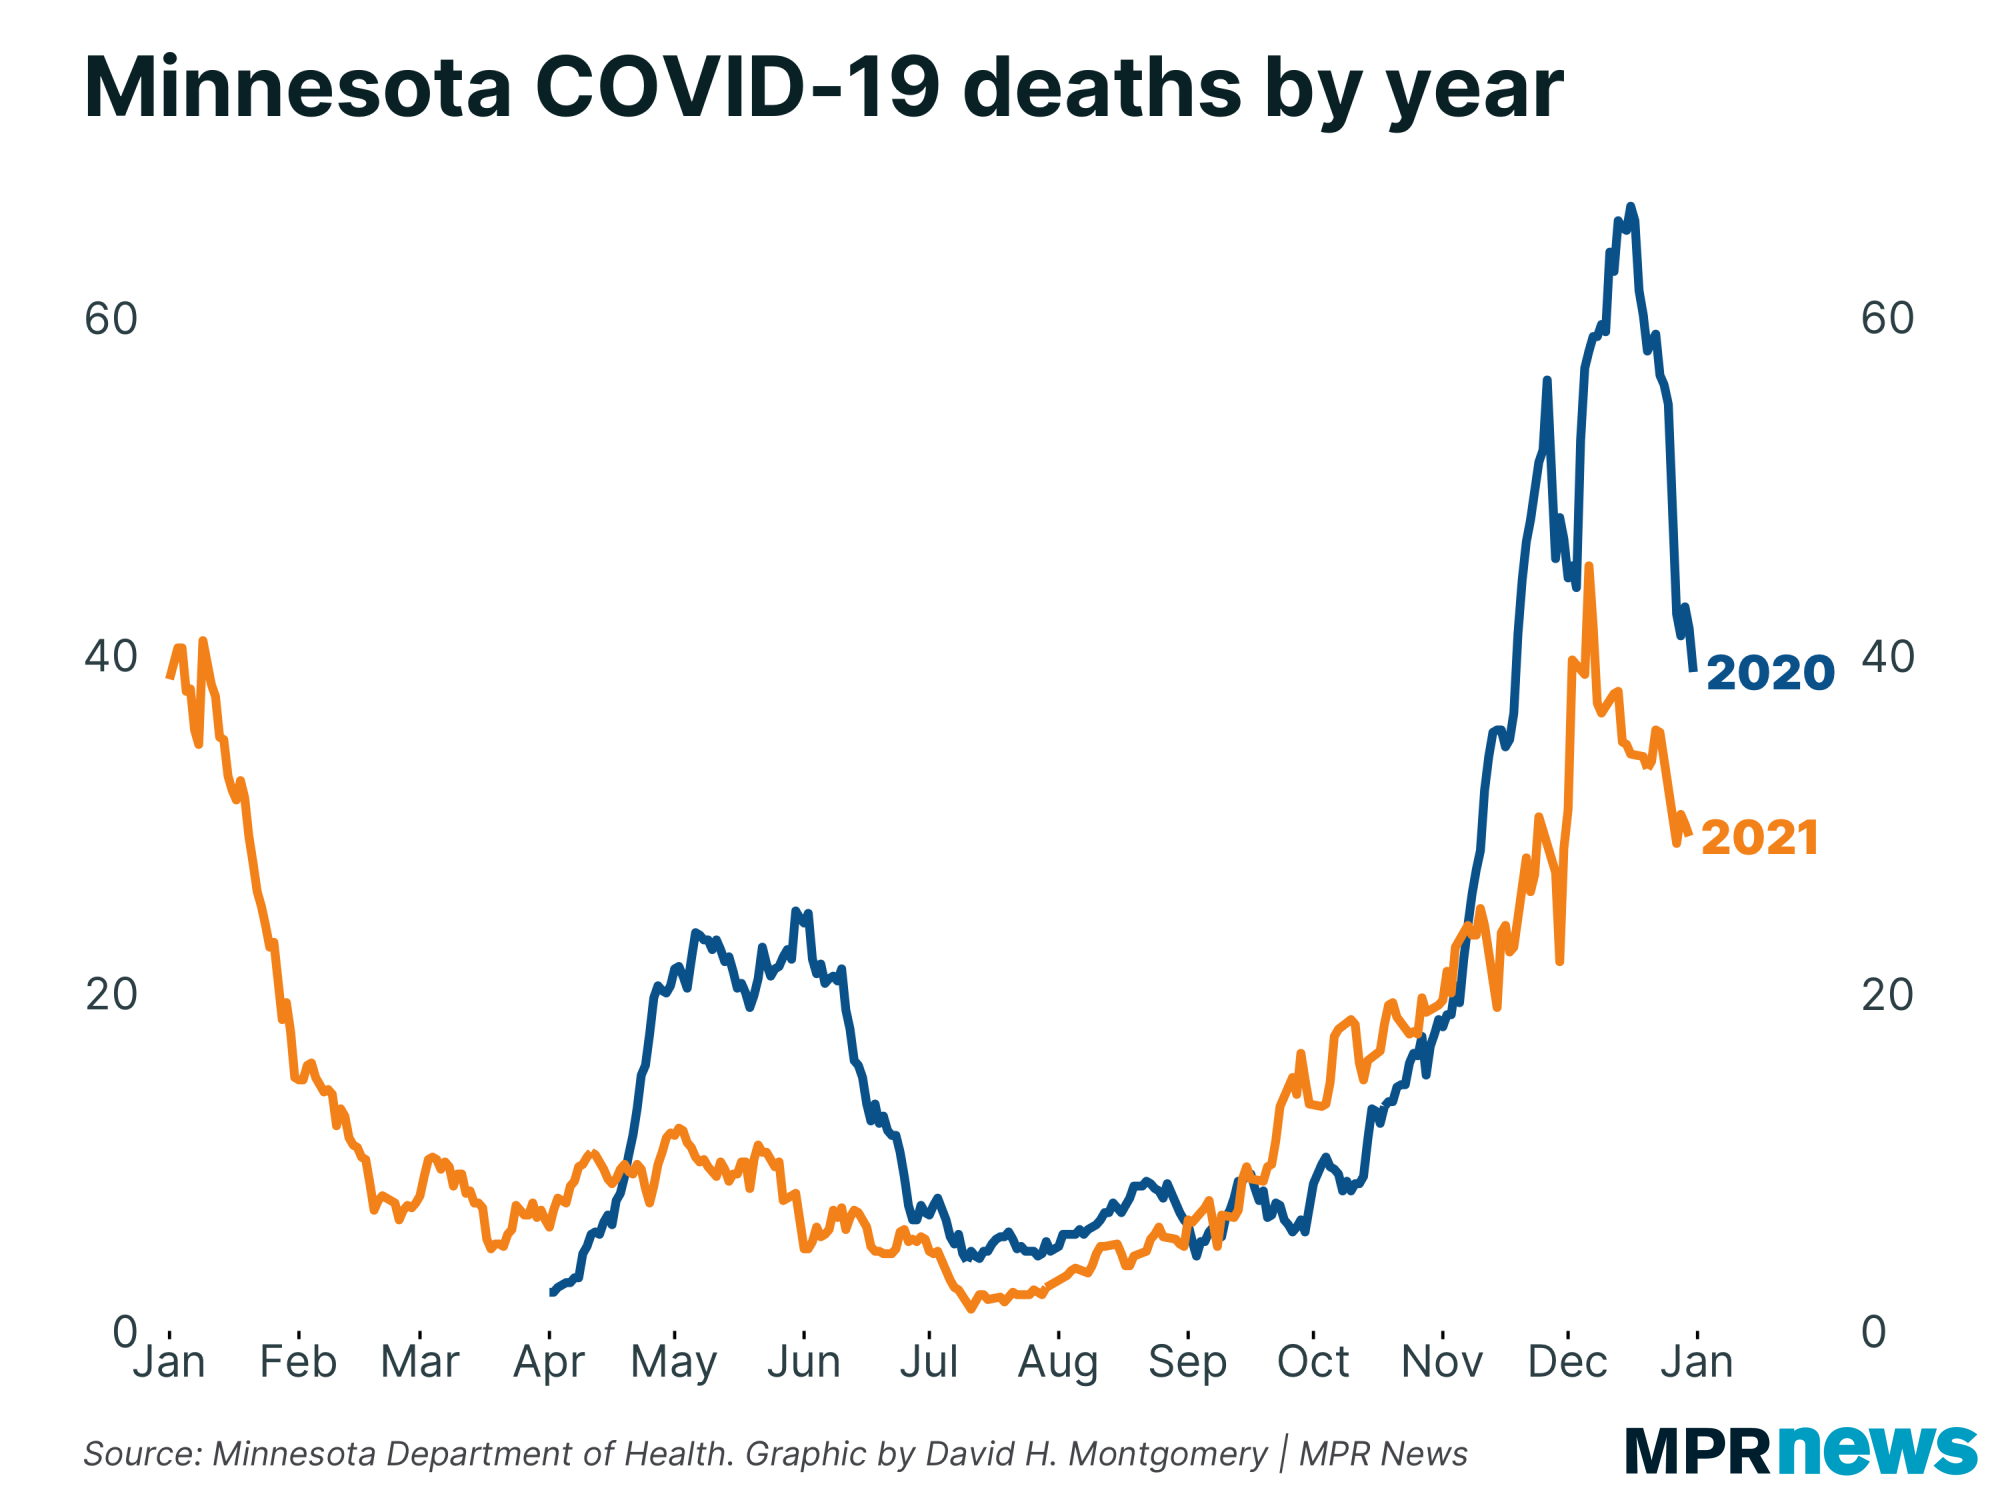 Graph of Minnesota COVID-19 death rates by year